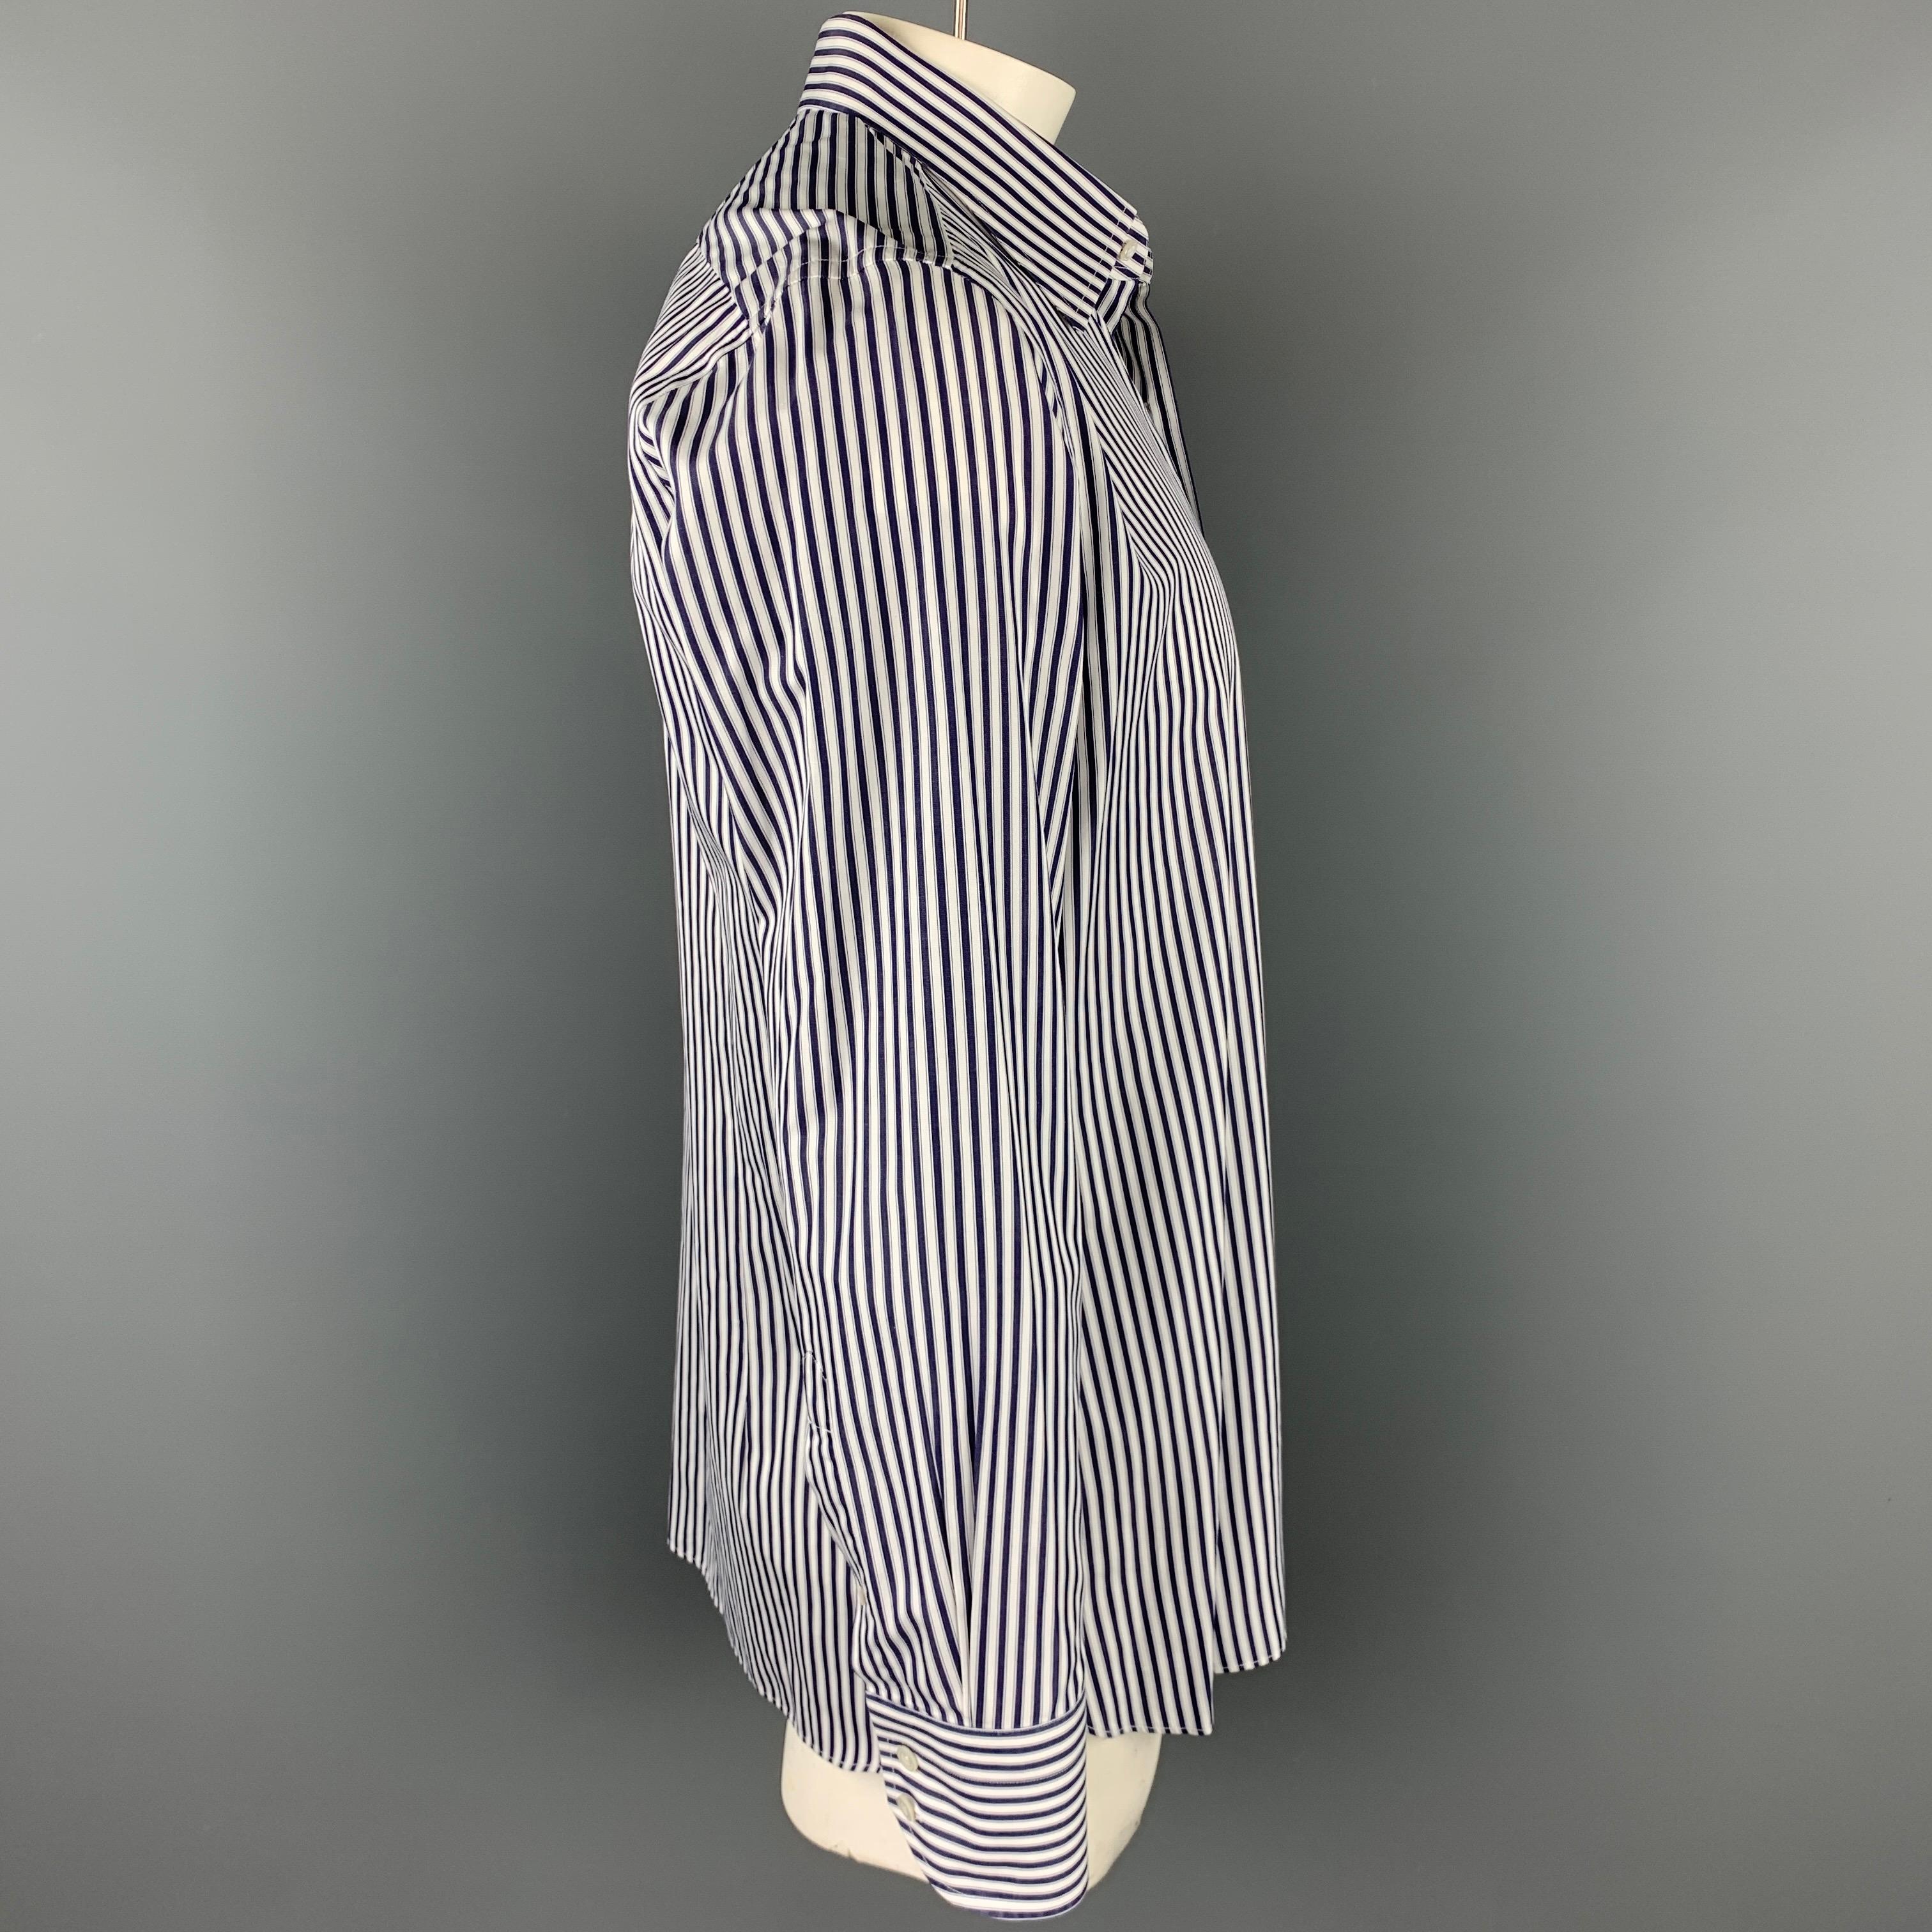 TOM FORD long sleeve shirt comes in a navy & white vertical stripe cotton featuring a button up style and a spread collar. Made in Italy.

Very Good Pre-Owned Condition.
Marked: 44/17.5

Measurements:

Shoulder: 19 in.
Chest: 48 in.
Sleeve: 27